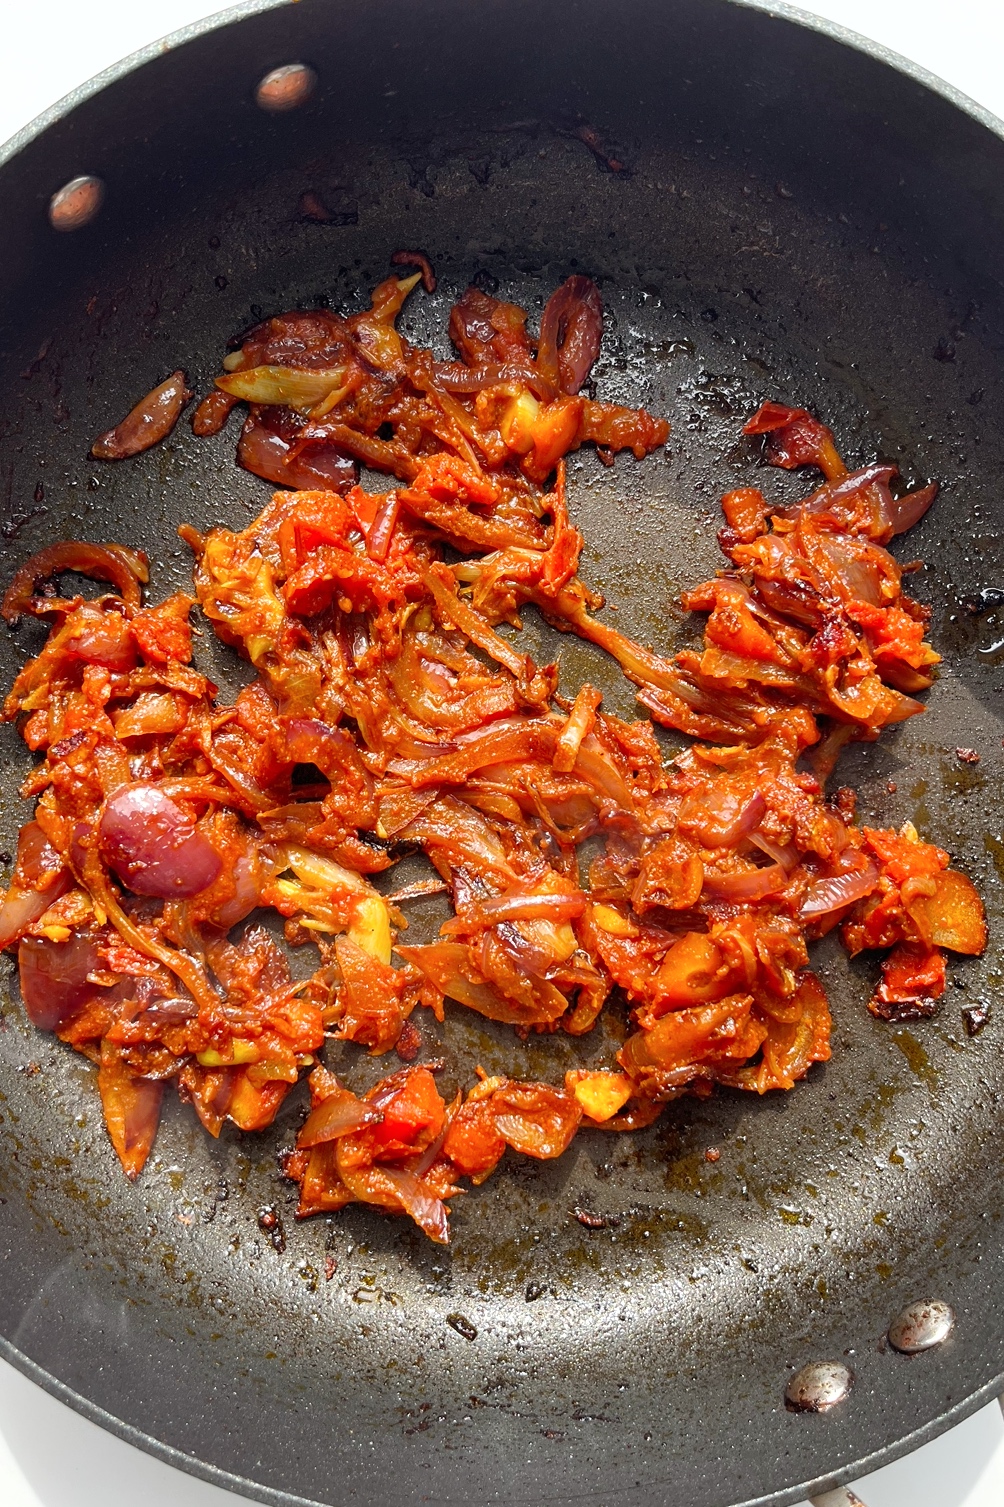 Red onion, garlic, and ginger, with tomatoes and spices in a non-stick frying pan.